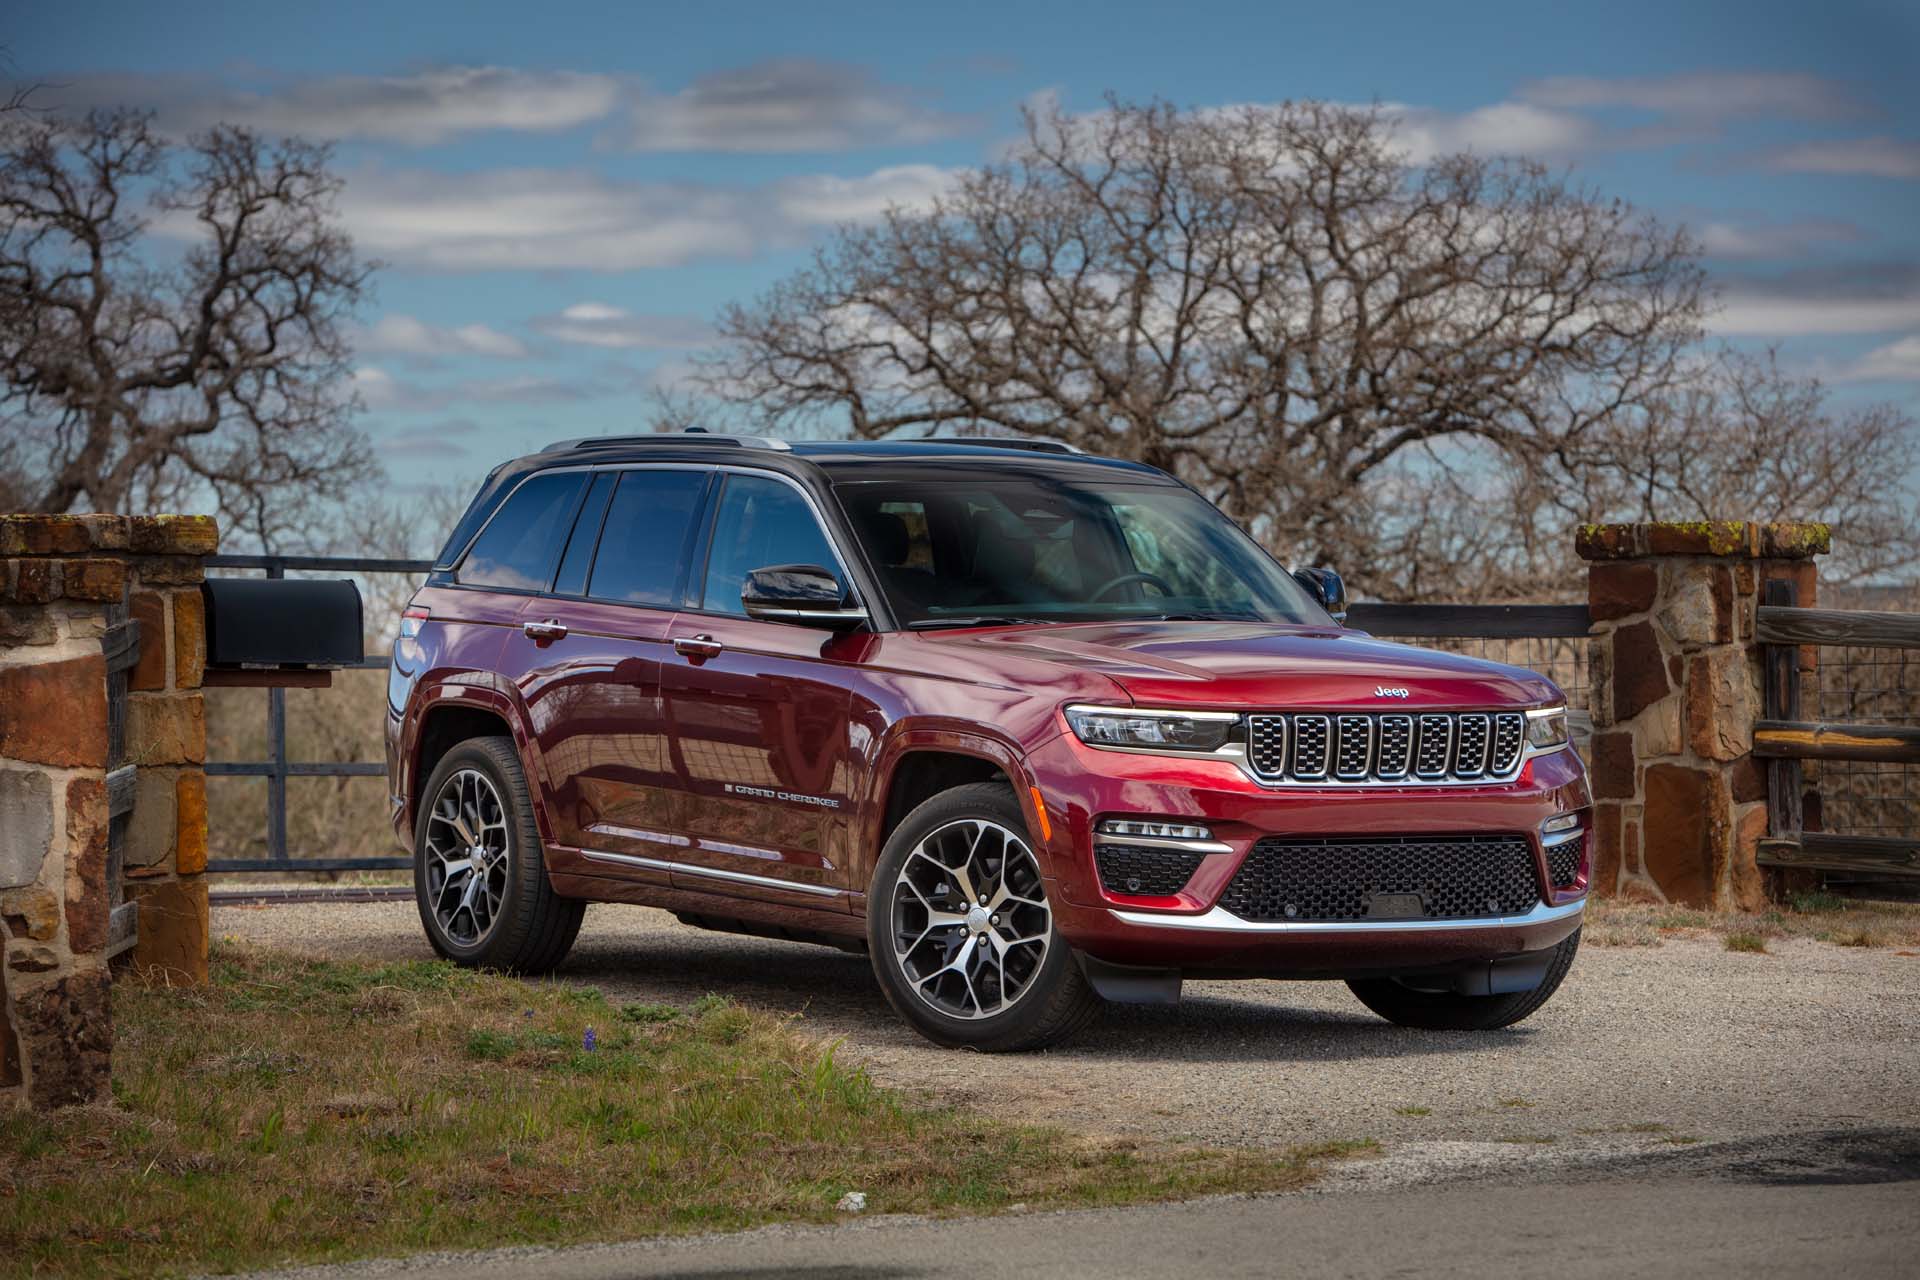 2022 Jeep Grand Cherokee 4xe plug-in hybrid recalled because engines may shut down